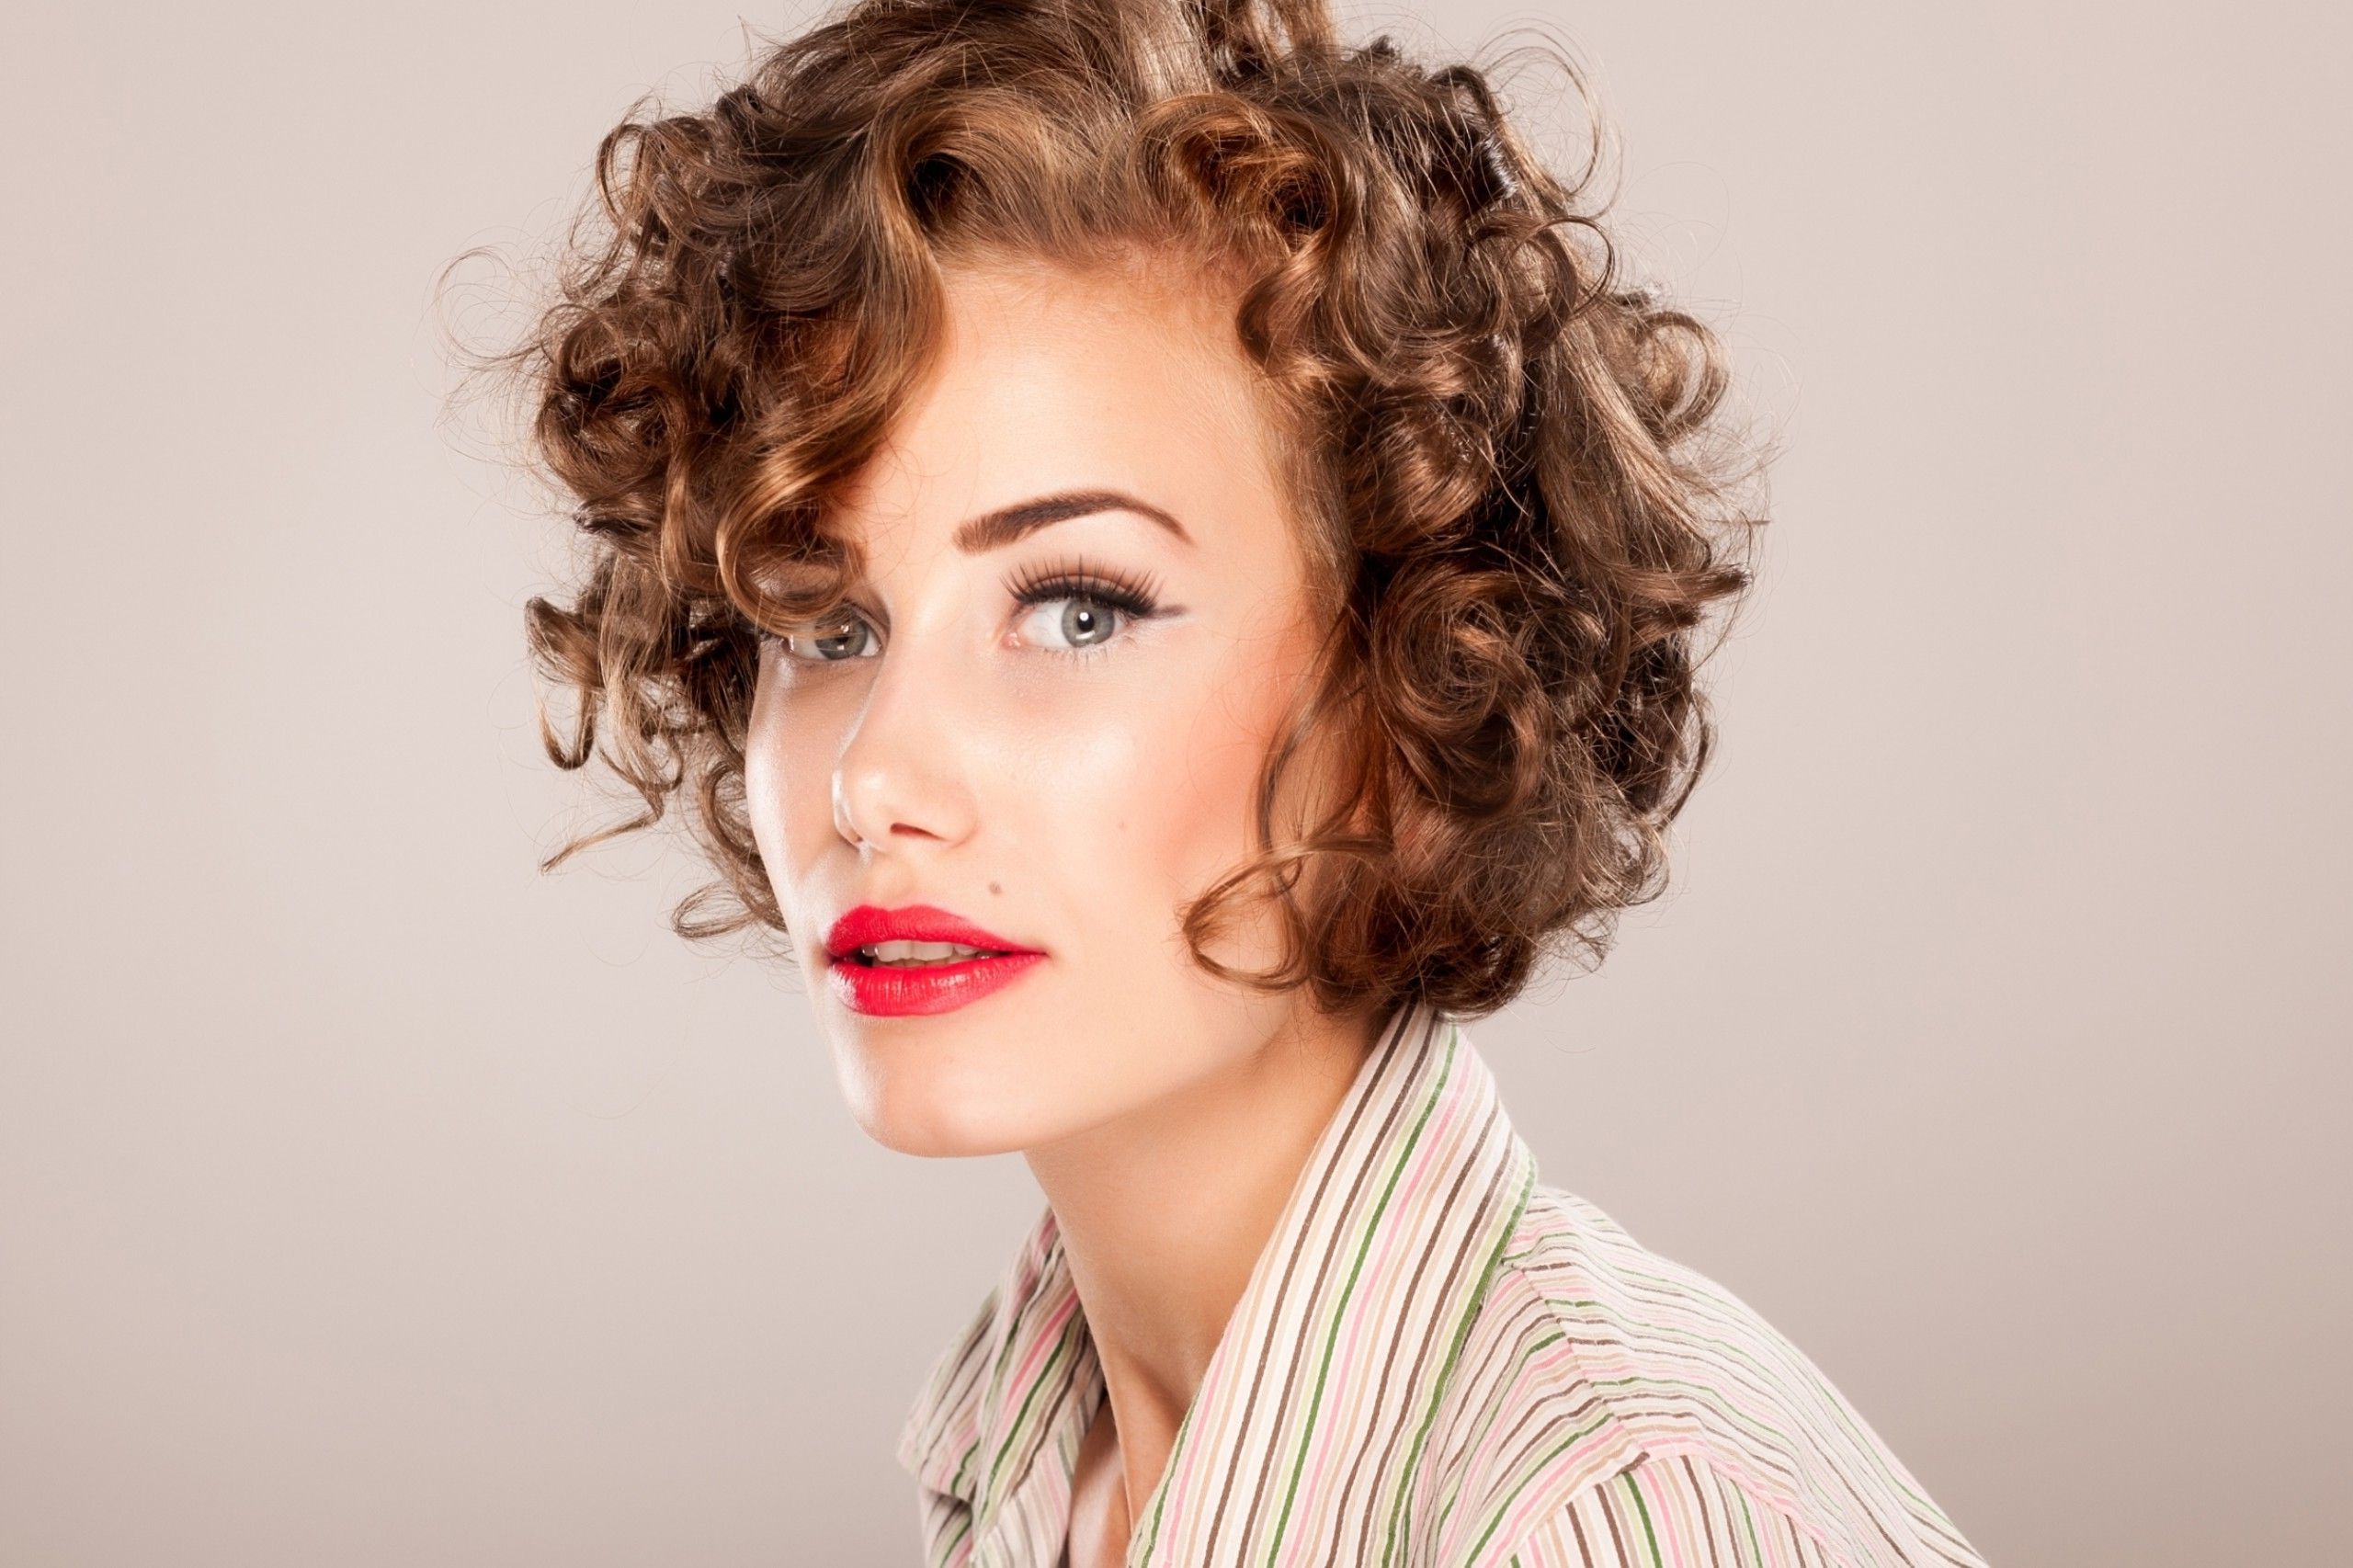 2018 Curly Short Haircuts – Short And Cuts Hairstyles Regarding Short Curly Hairstyles For Fine Hair (View 8 of 25)